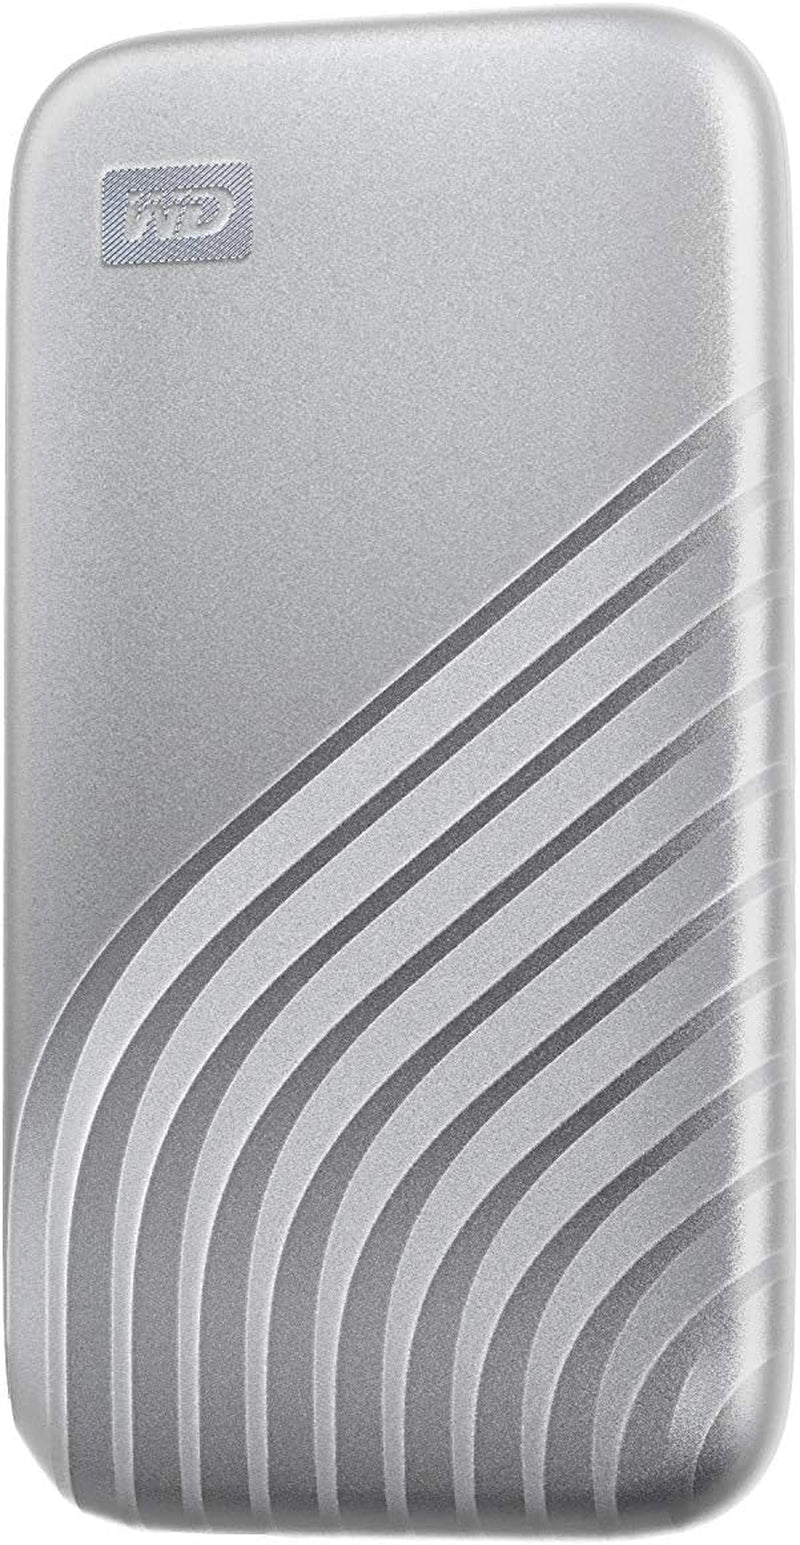 1TB My Passport SSD Portable External Solid State Drive, Silver, Sturdy and Blazing Fast, Password Protection with Hardware Encryption - BAGF0010BSL-WESN 1TB Silver